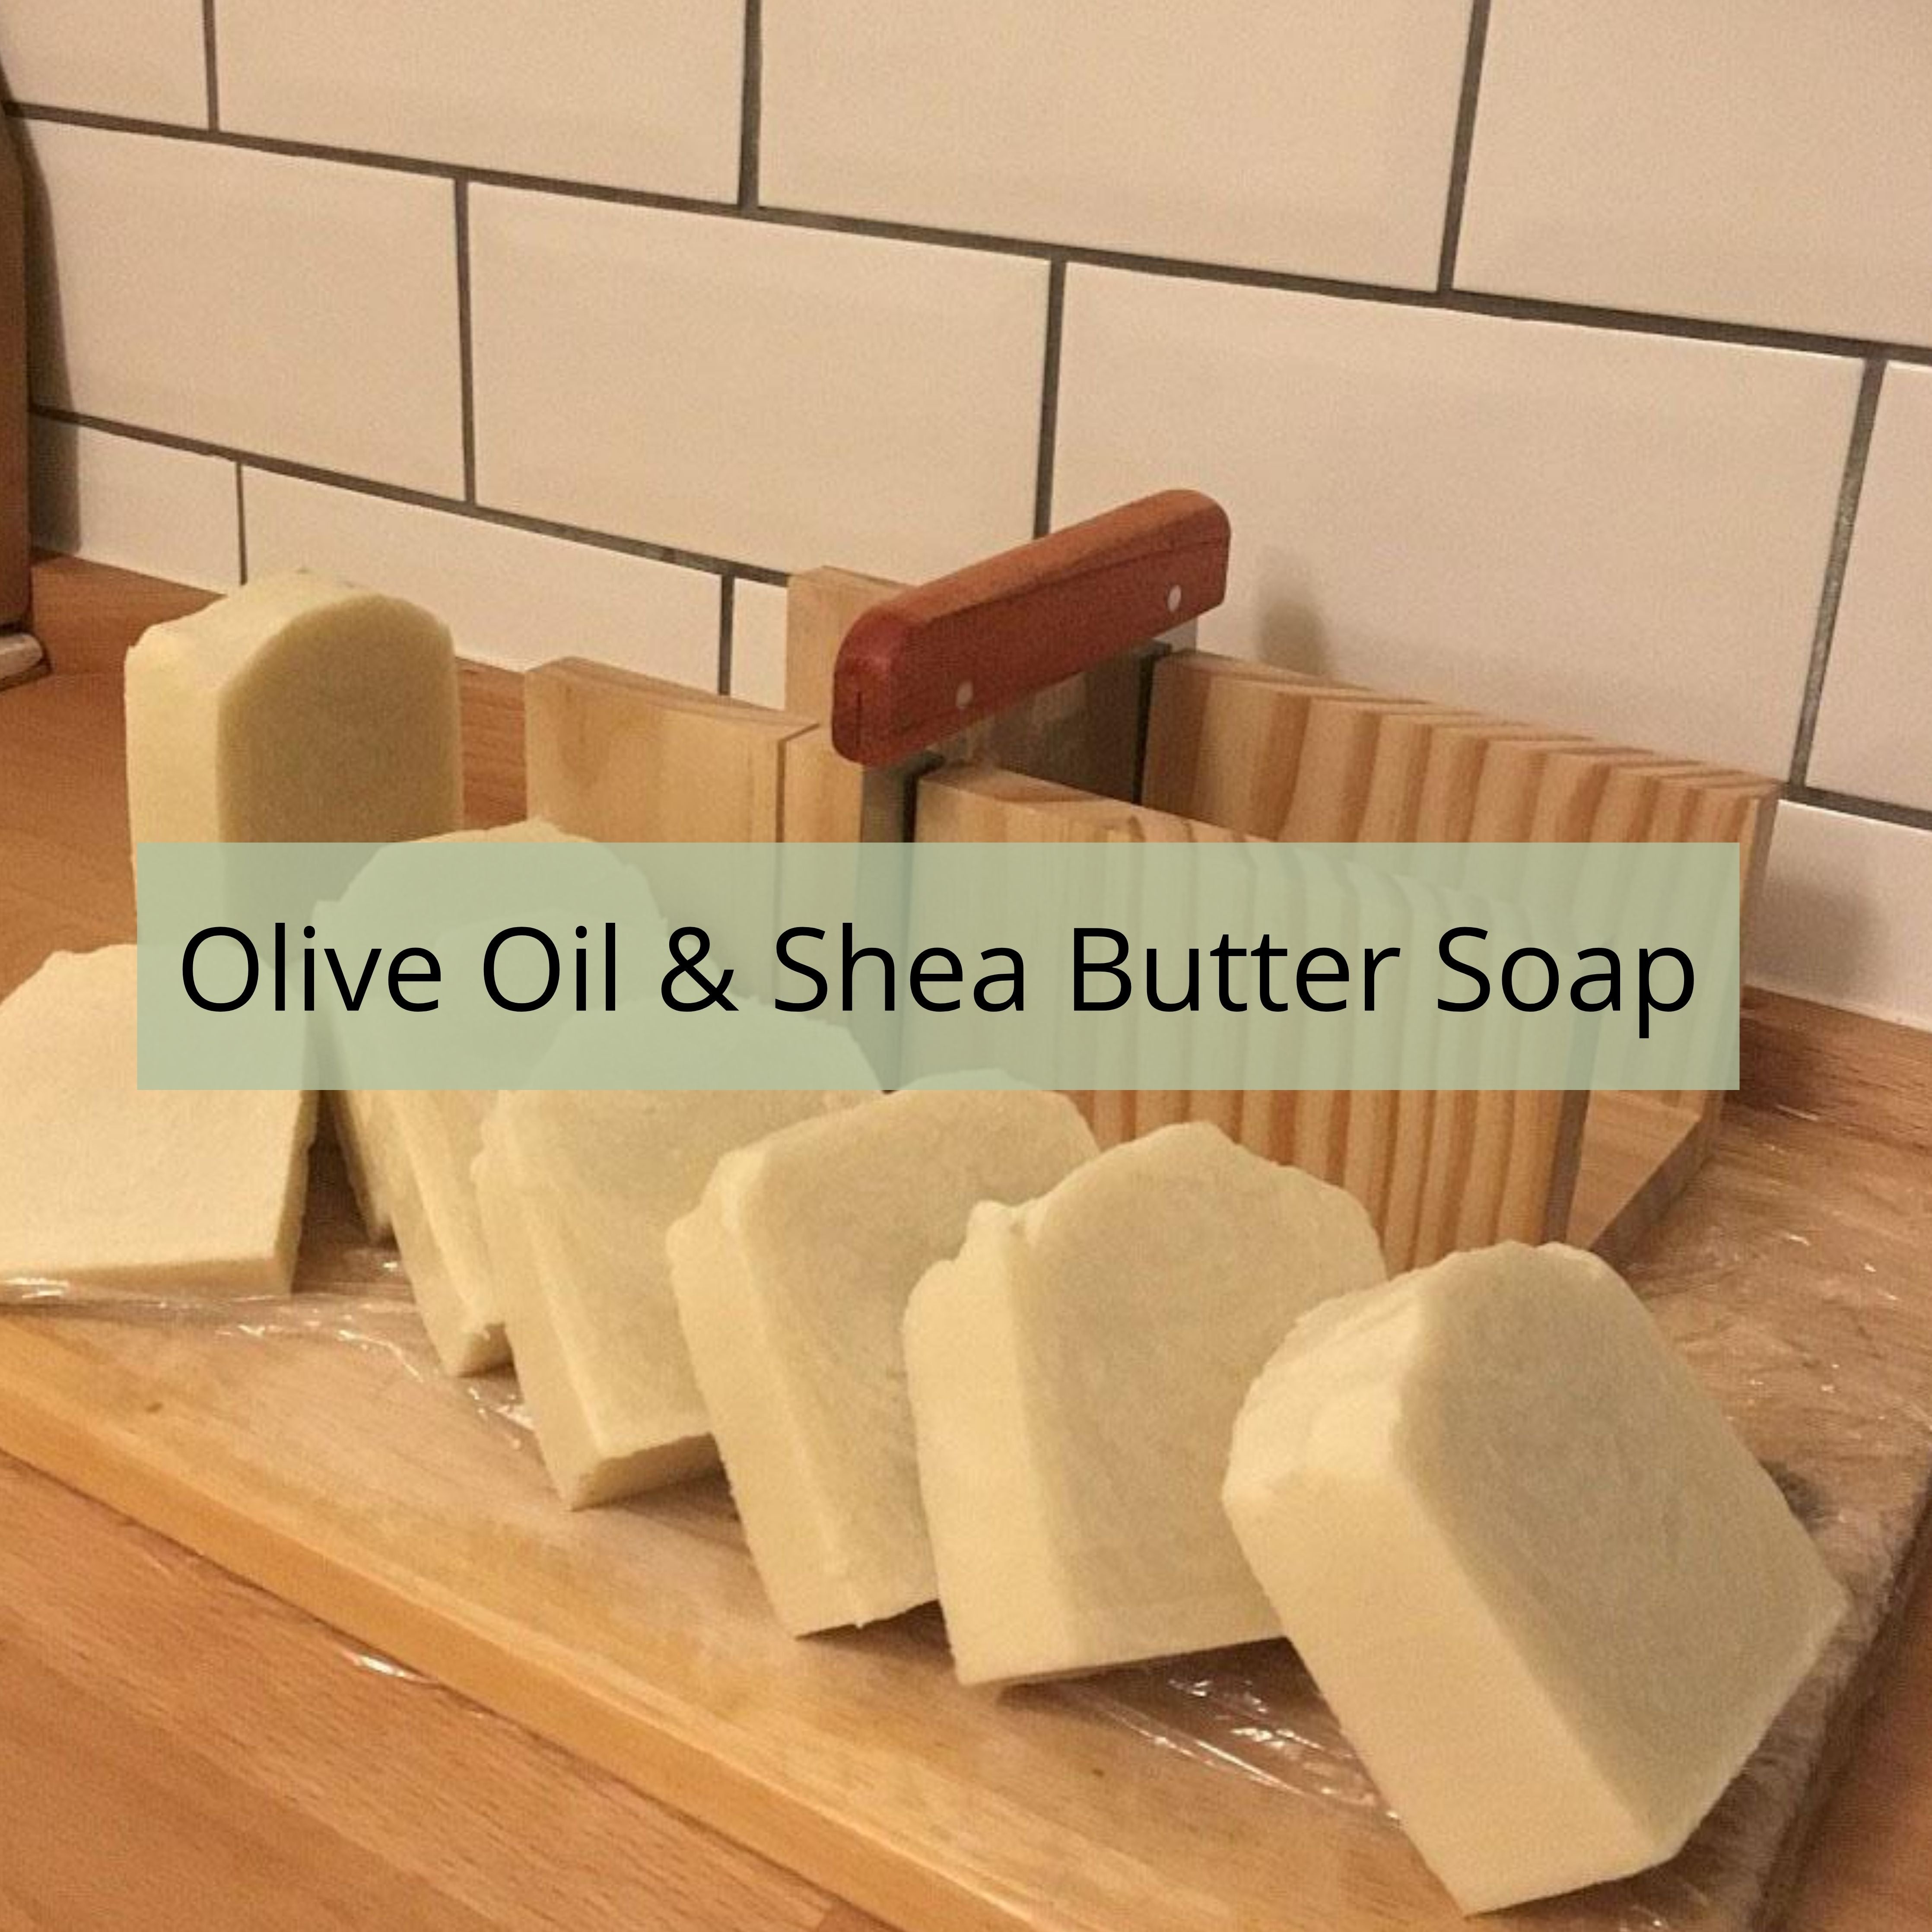 How To Make Your Own Shea Butter Soap - Eco-Age